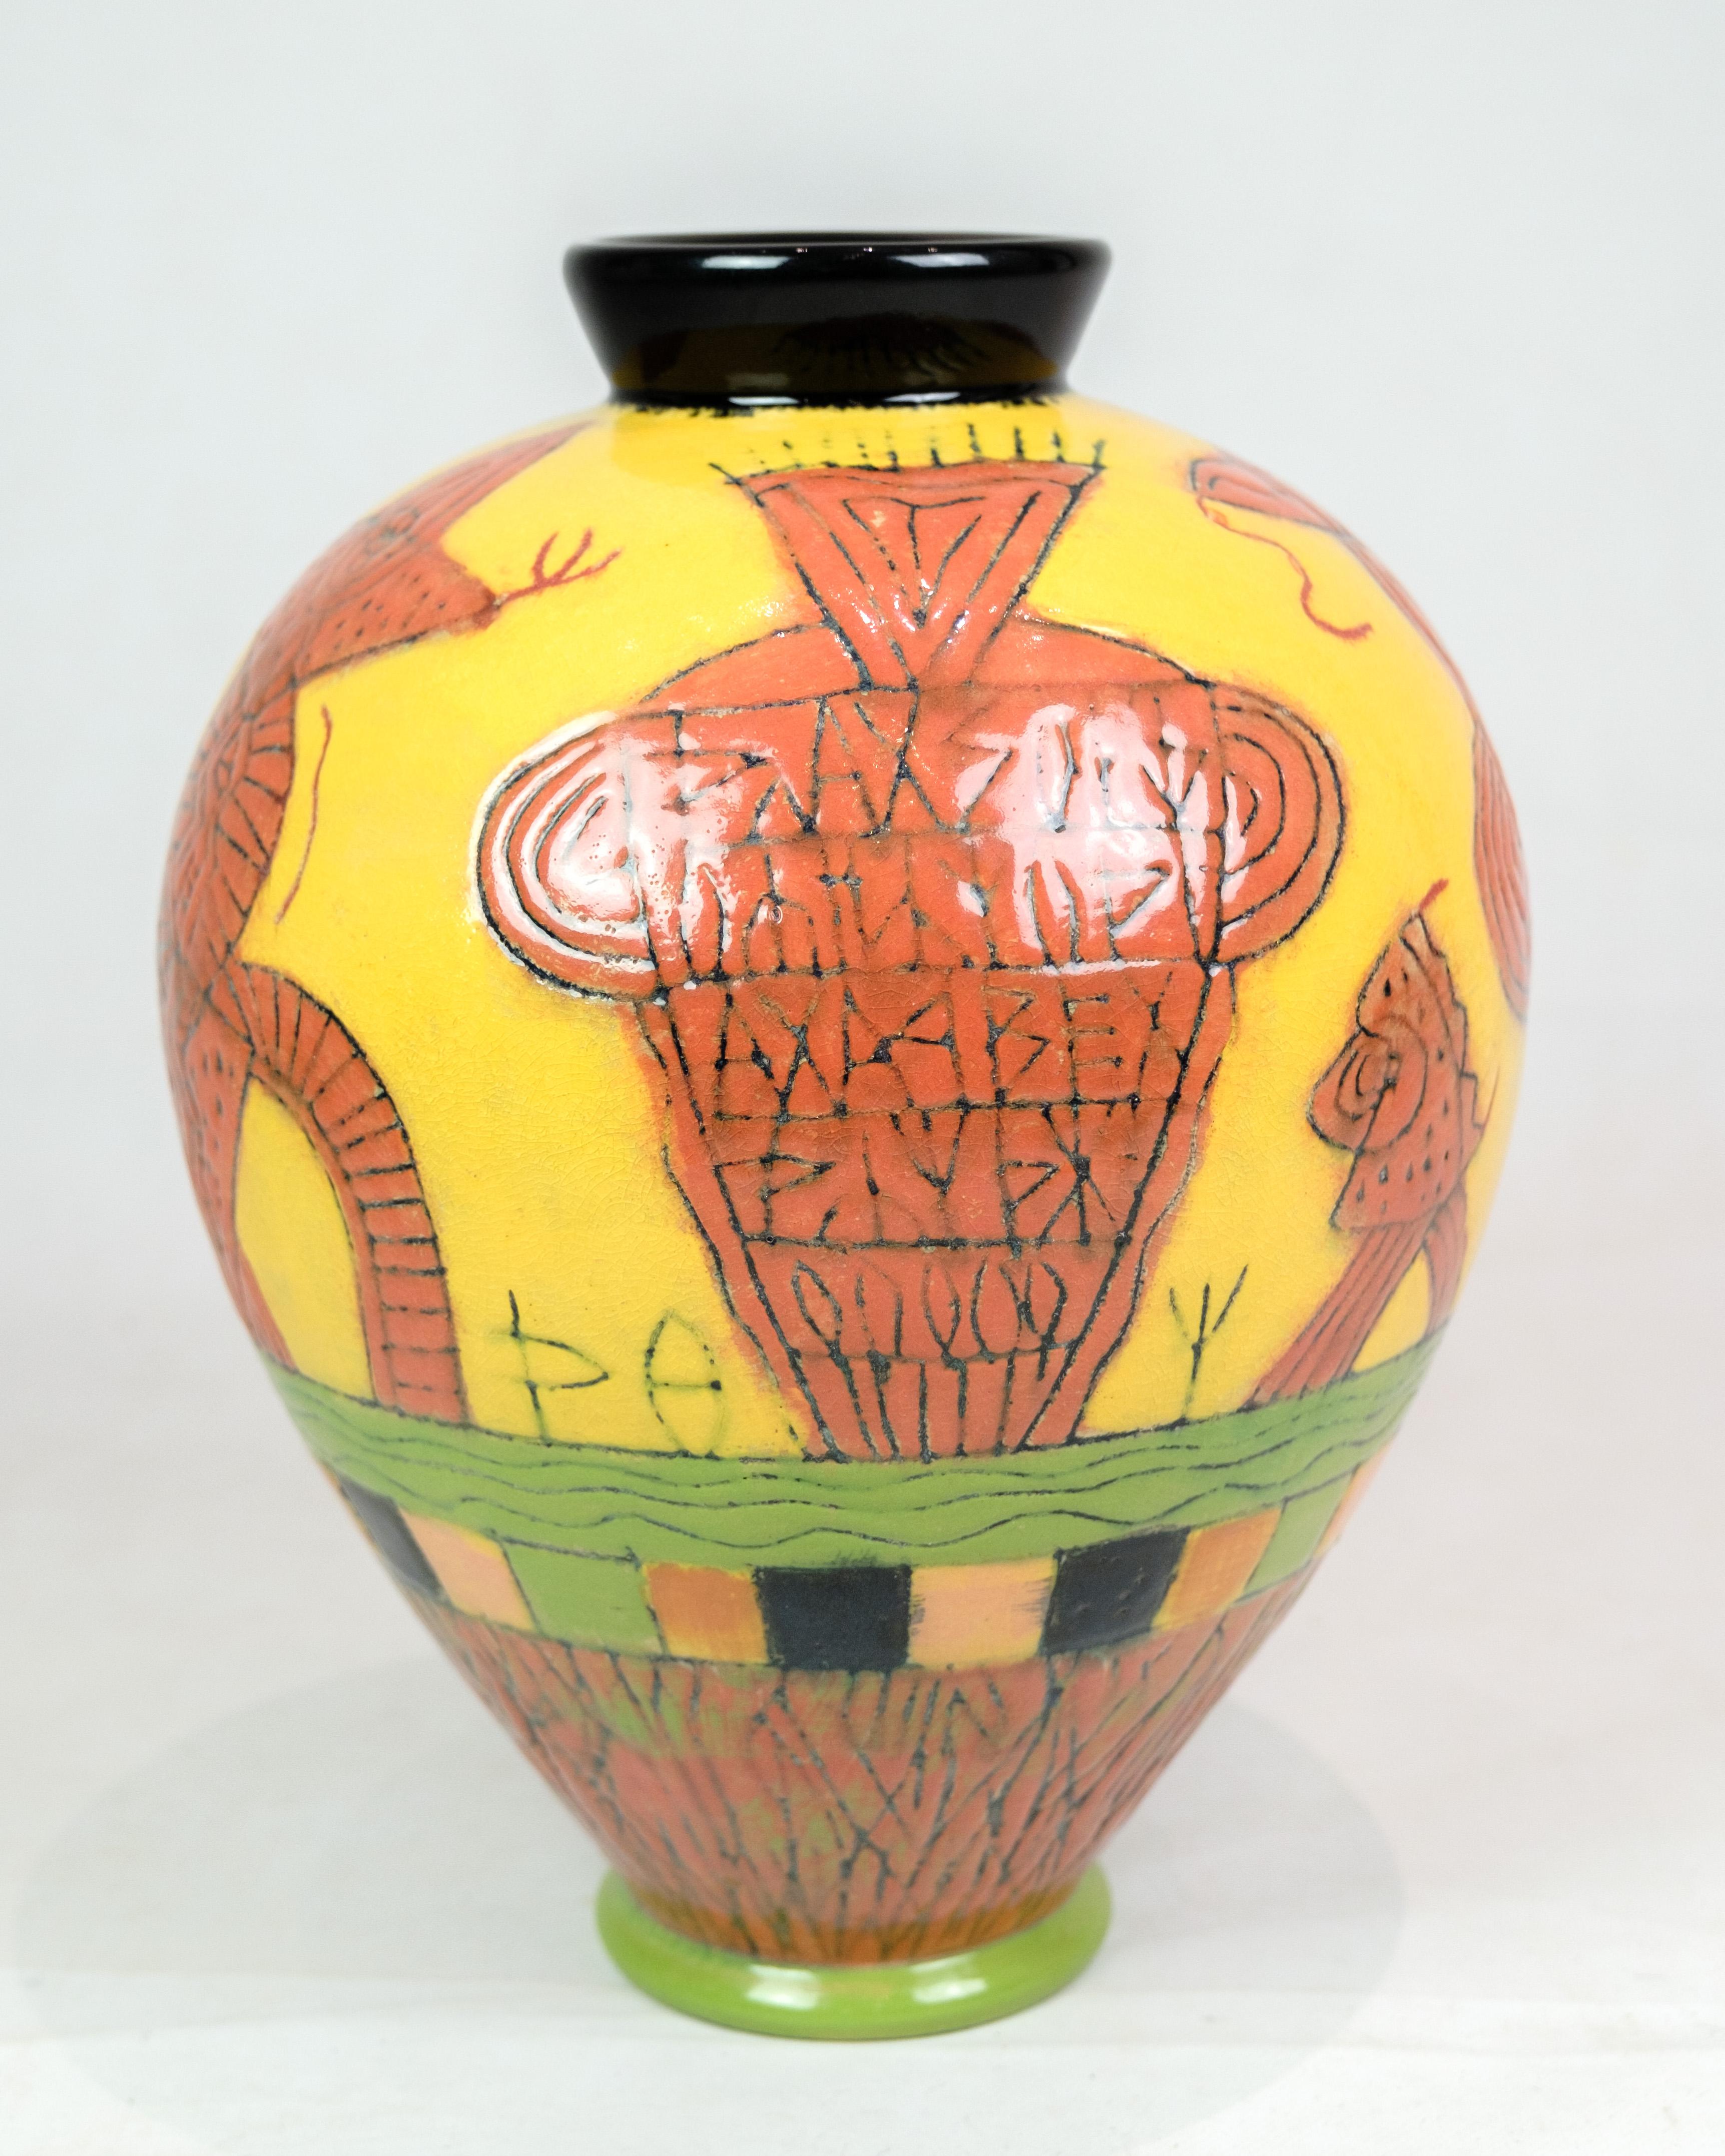 The vase, designed and hand painted by Lene Regius with yellow, orange and green glaze, is an artistic piece that bears the stamp of individual craftsmanship and unique design. Lene Regius' signature adds a personal and authentic dimension to the